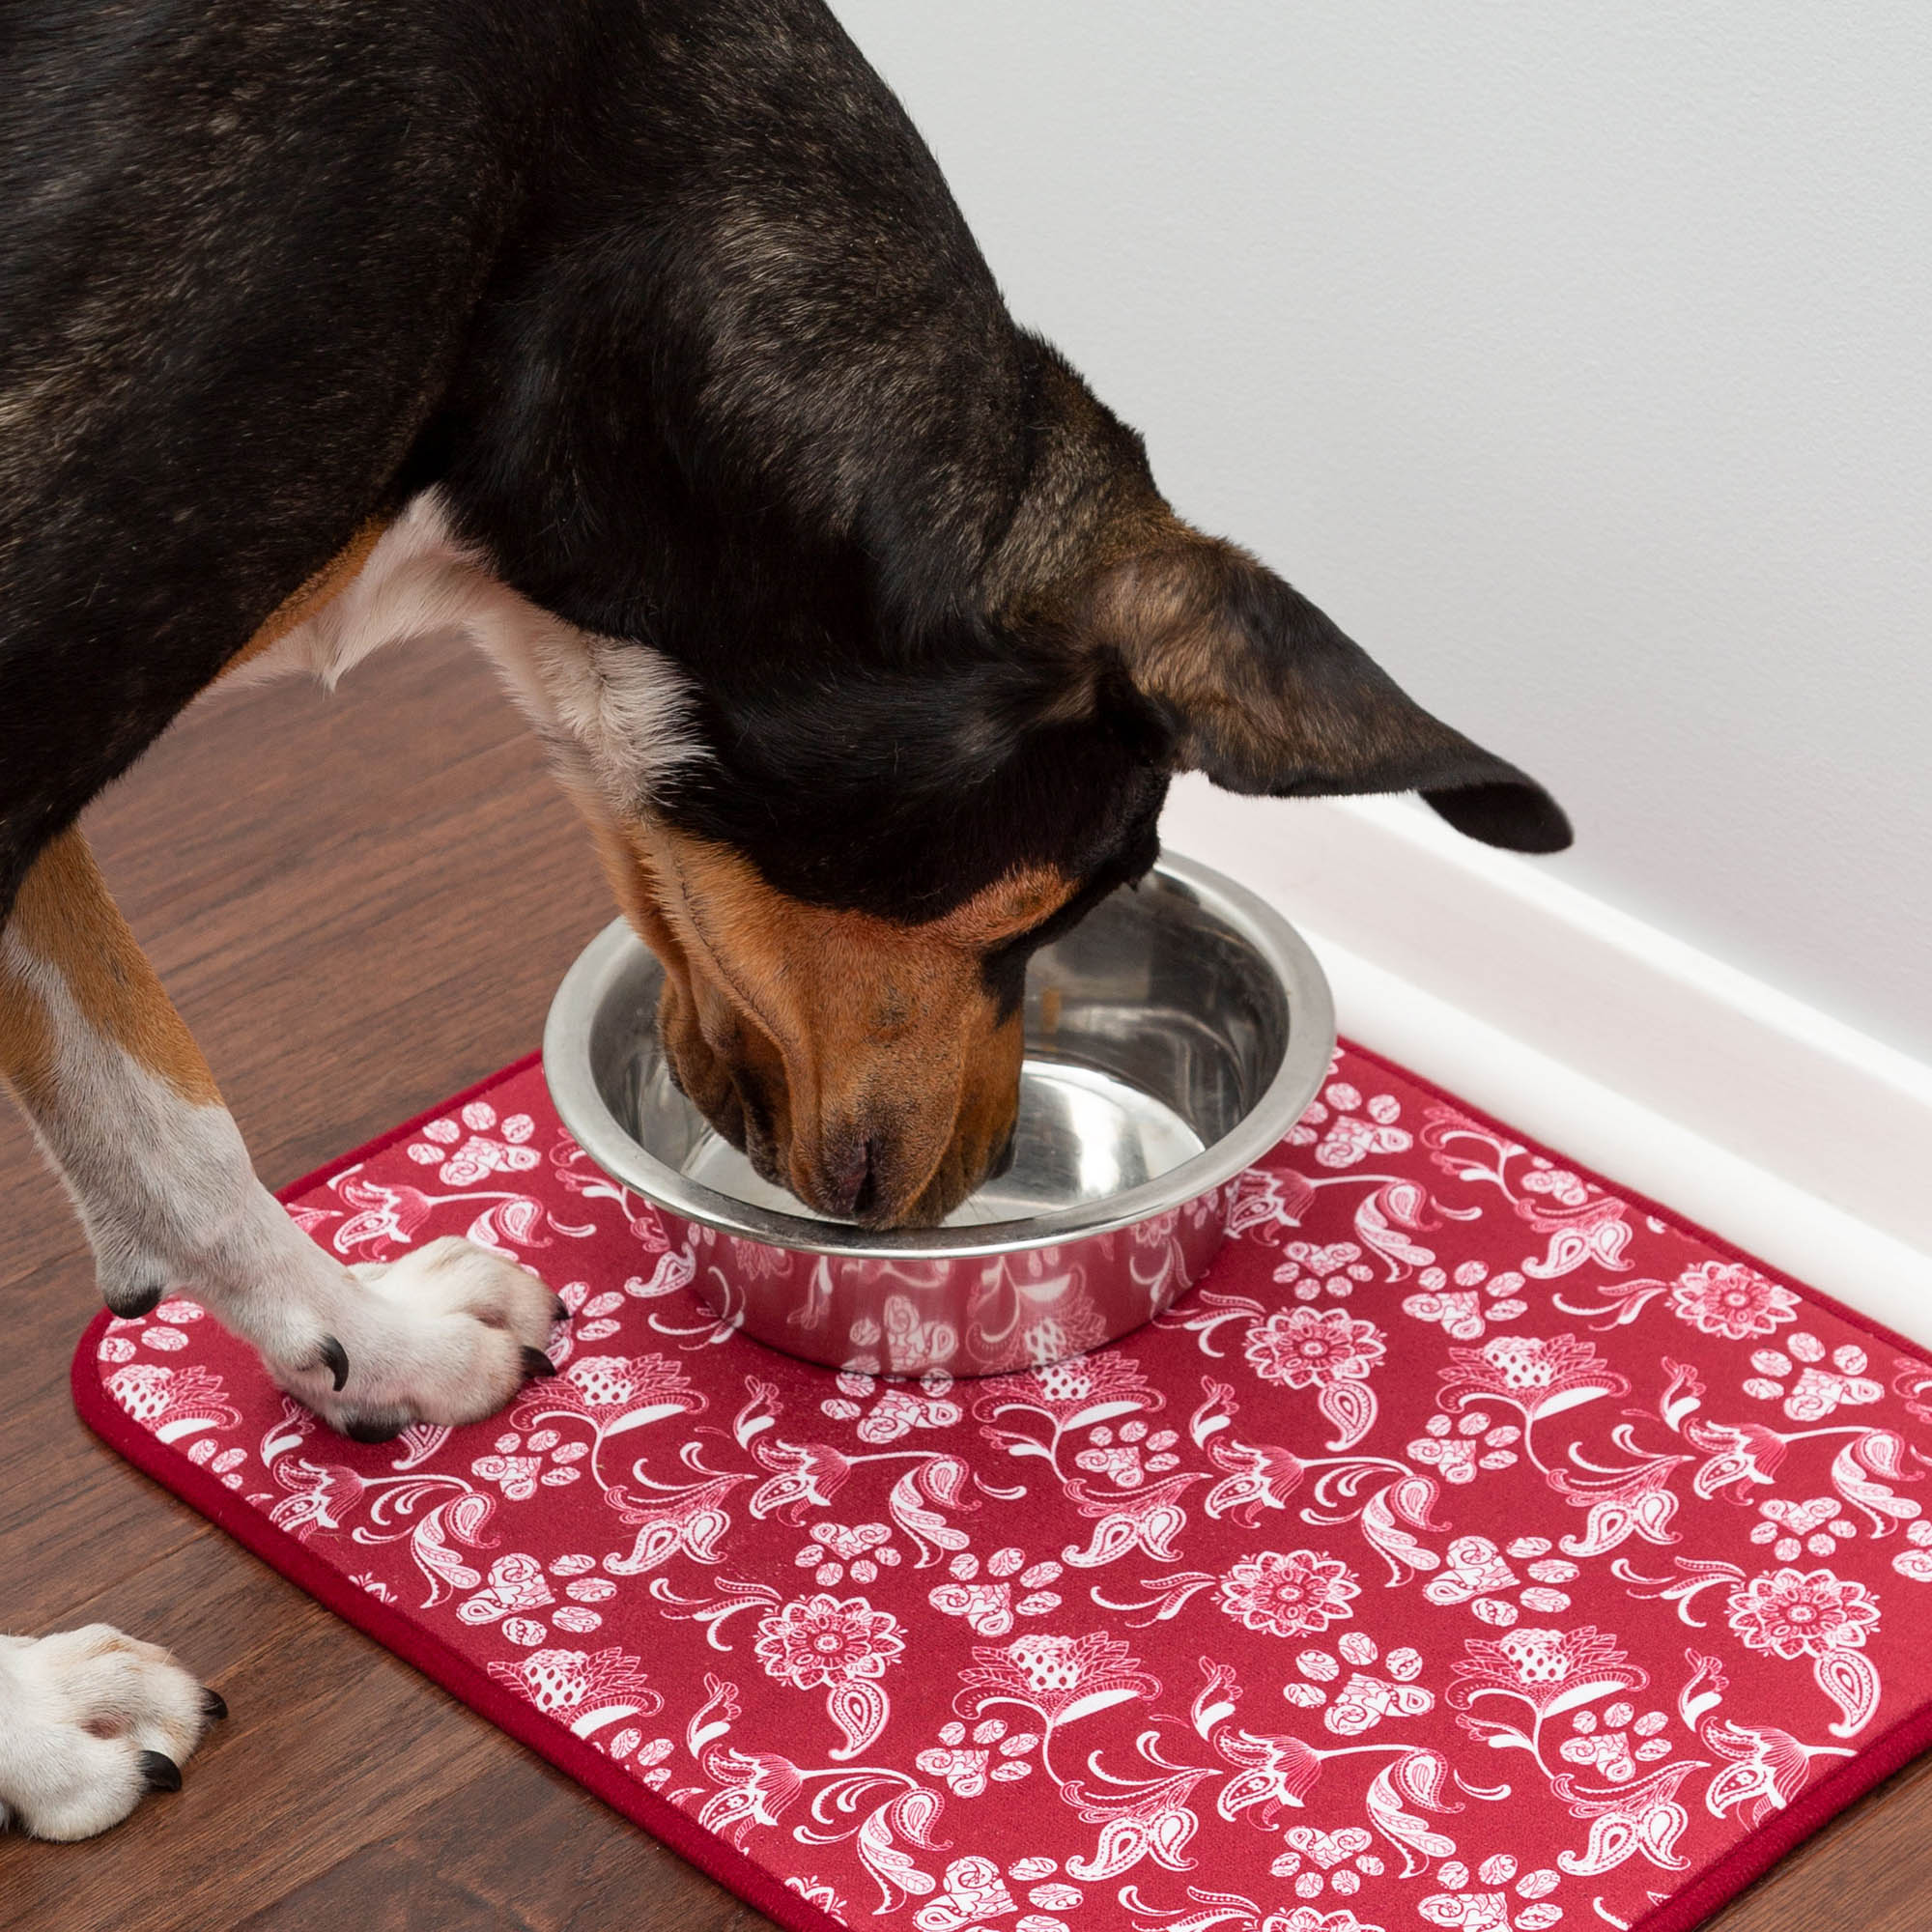 Messy Paws Absorbent Pet Dish Mat - Red Paisley Paws